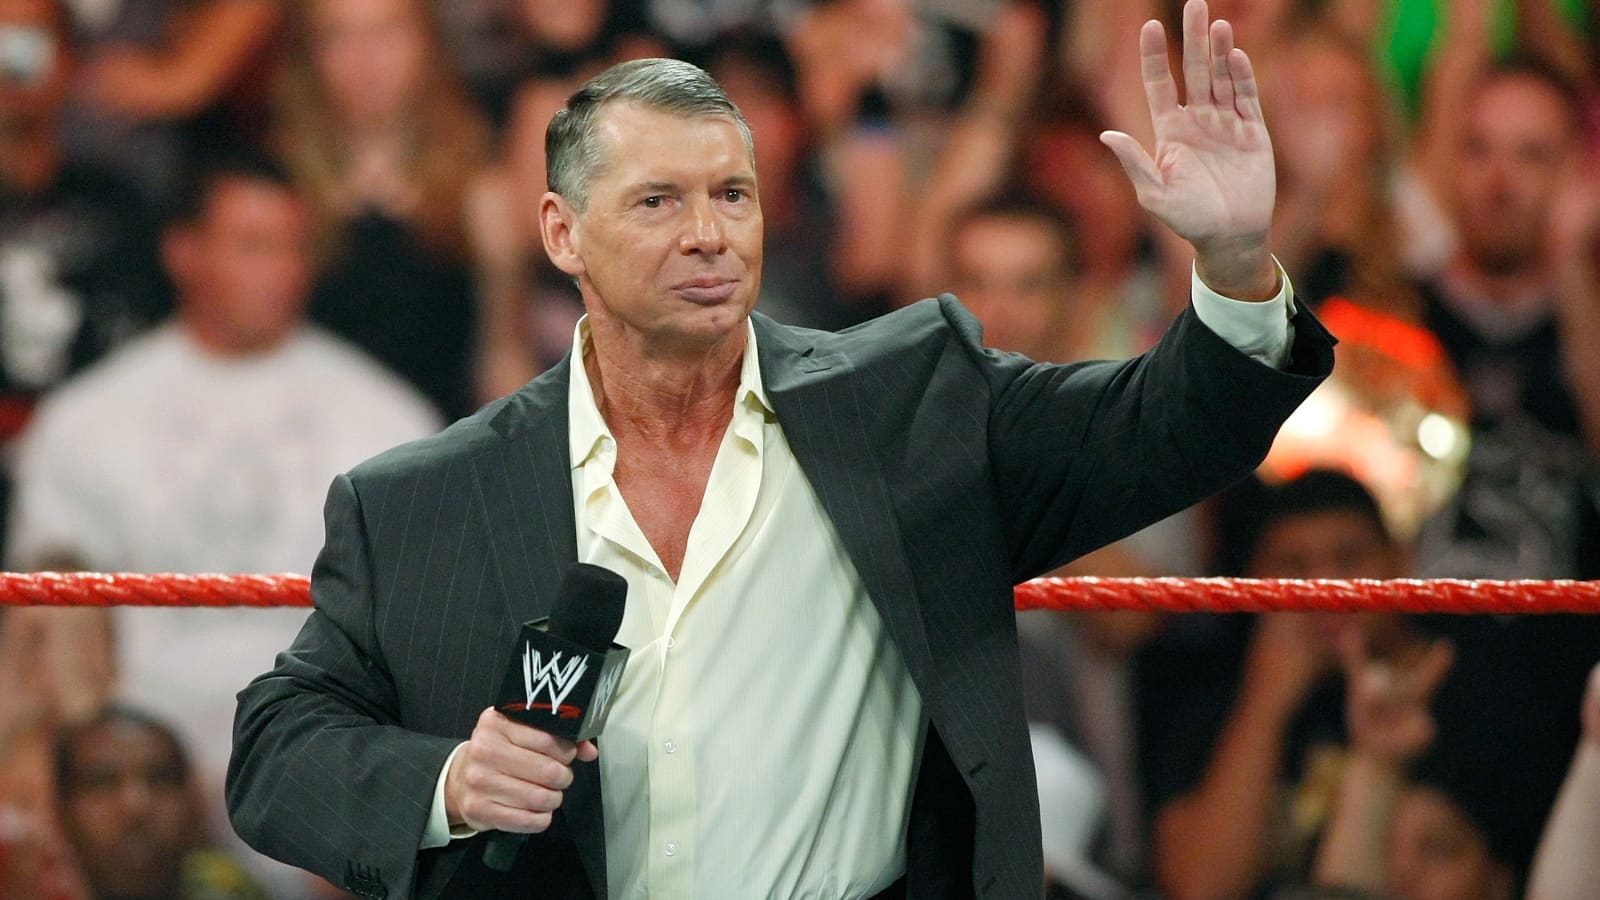 Former WWE CEO Vince McMahon served with federal grand jury subpoena and search warrant